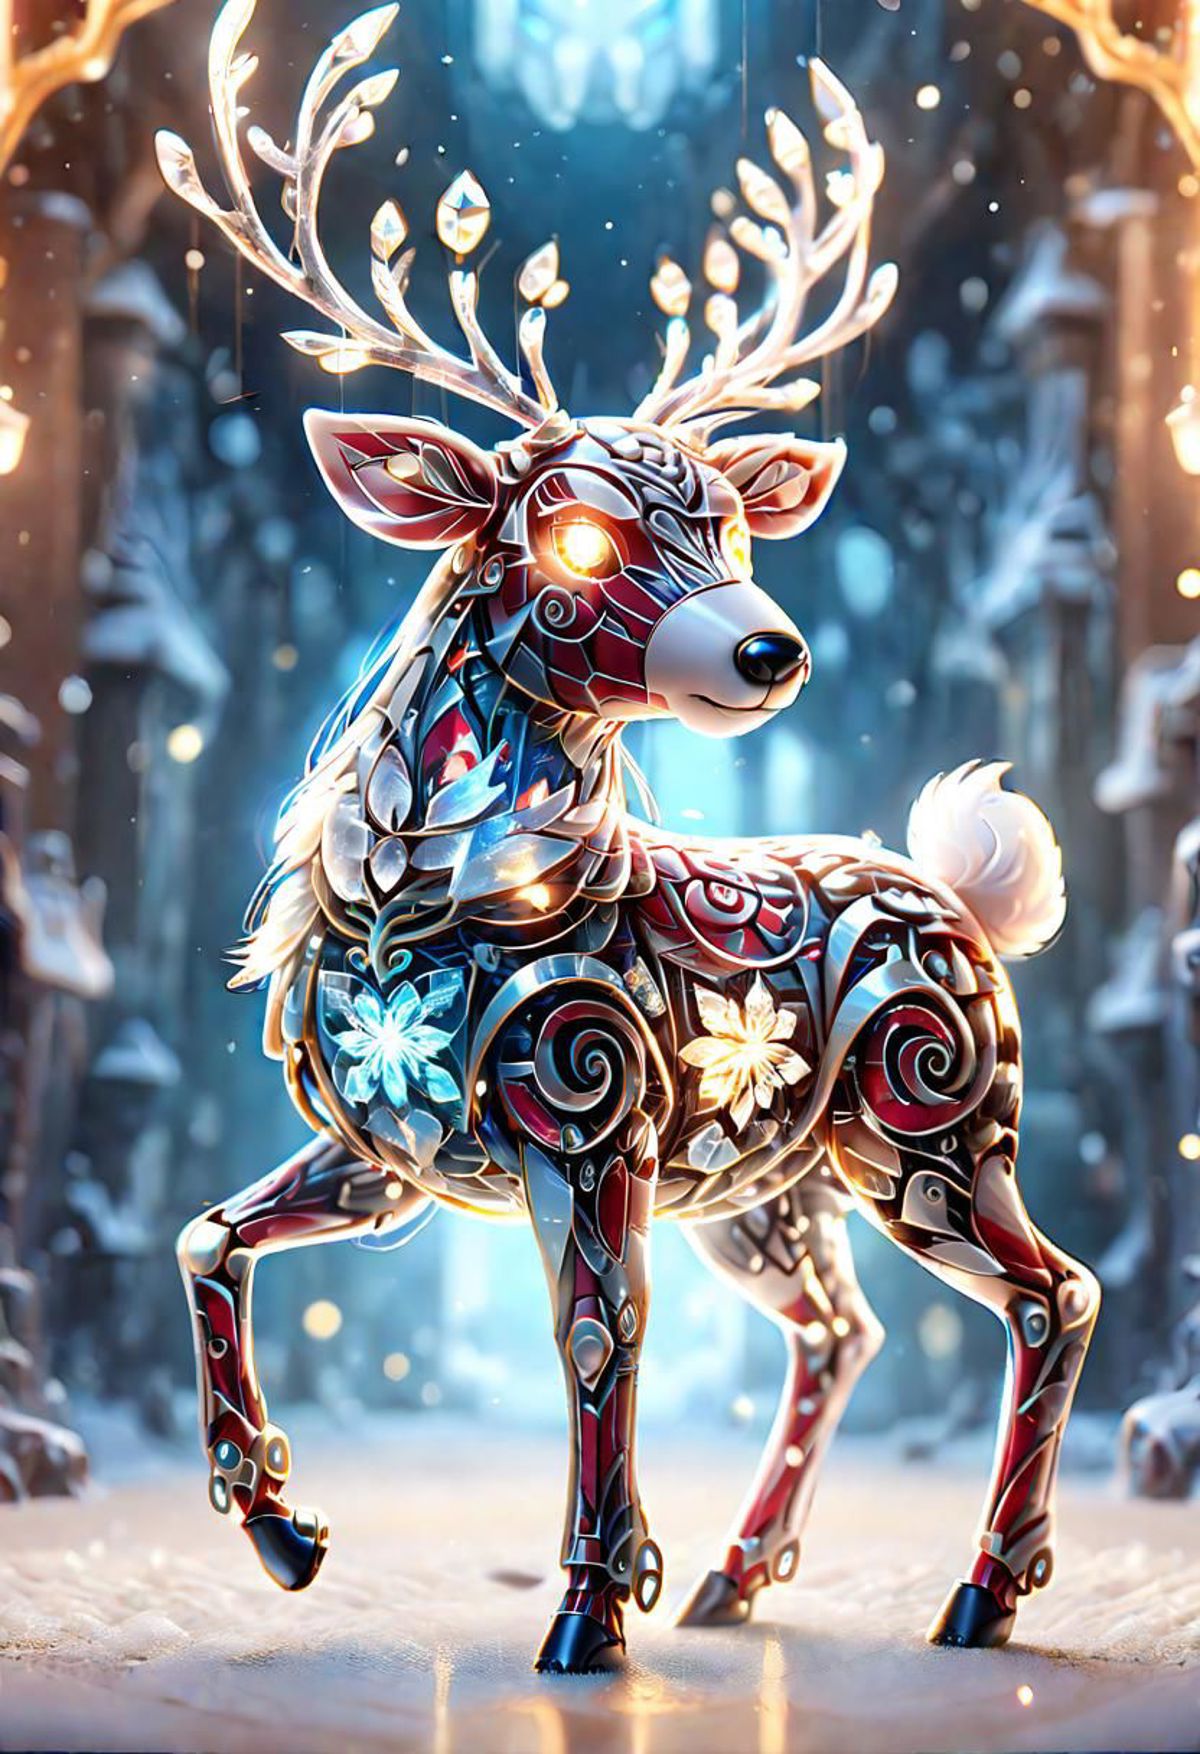 A beautifully decorated reindeer with antlers, painted with red, white, blue, and green colors, stands in the snow.